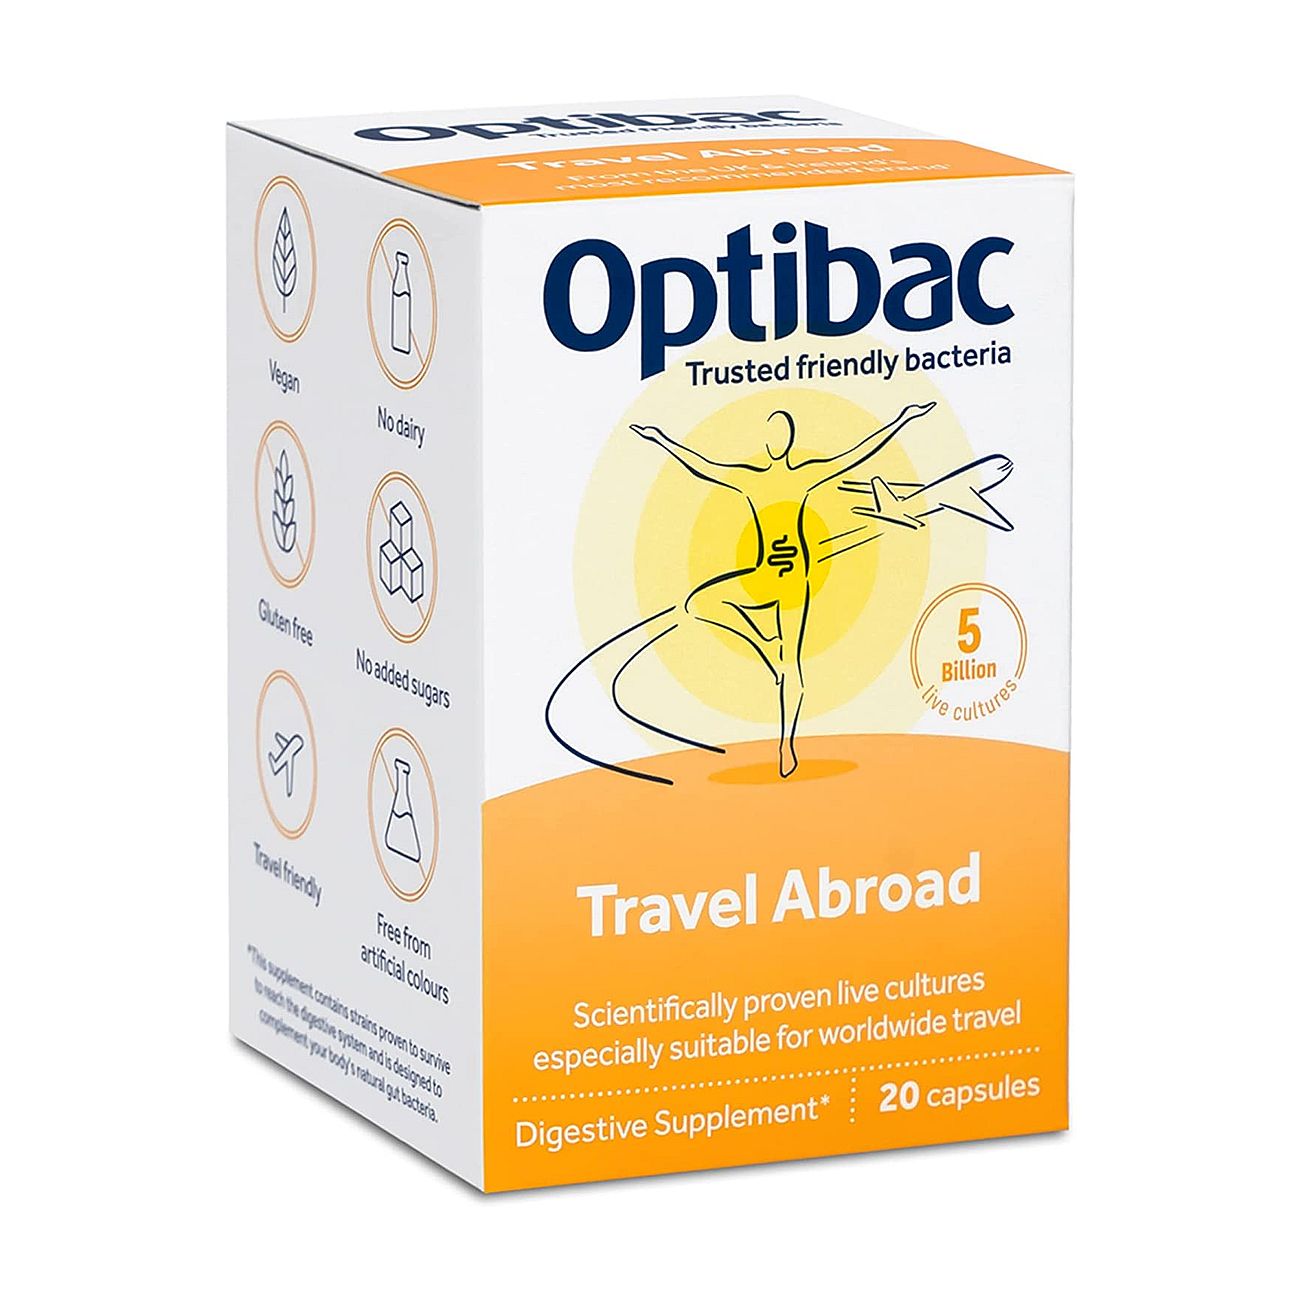 For Travelling Abroad 20 Capsules